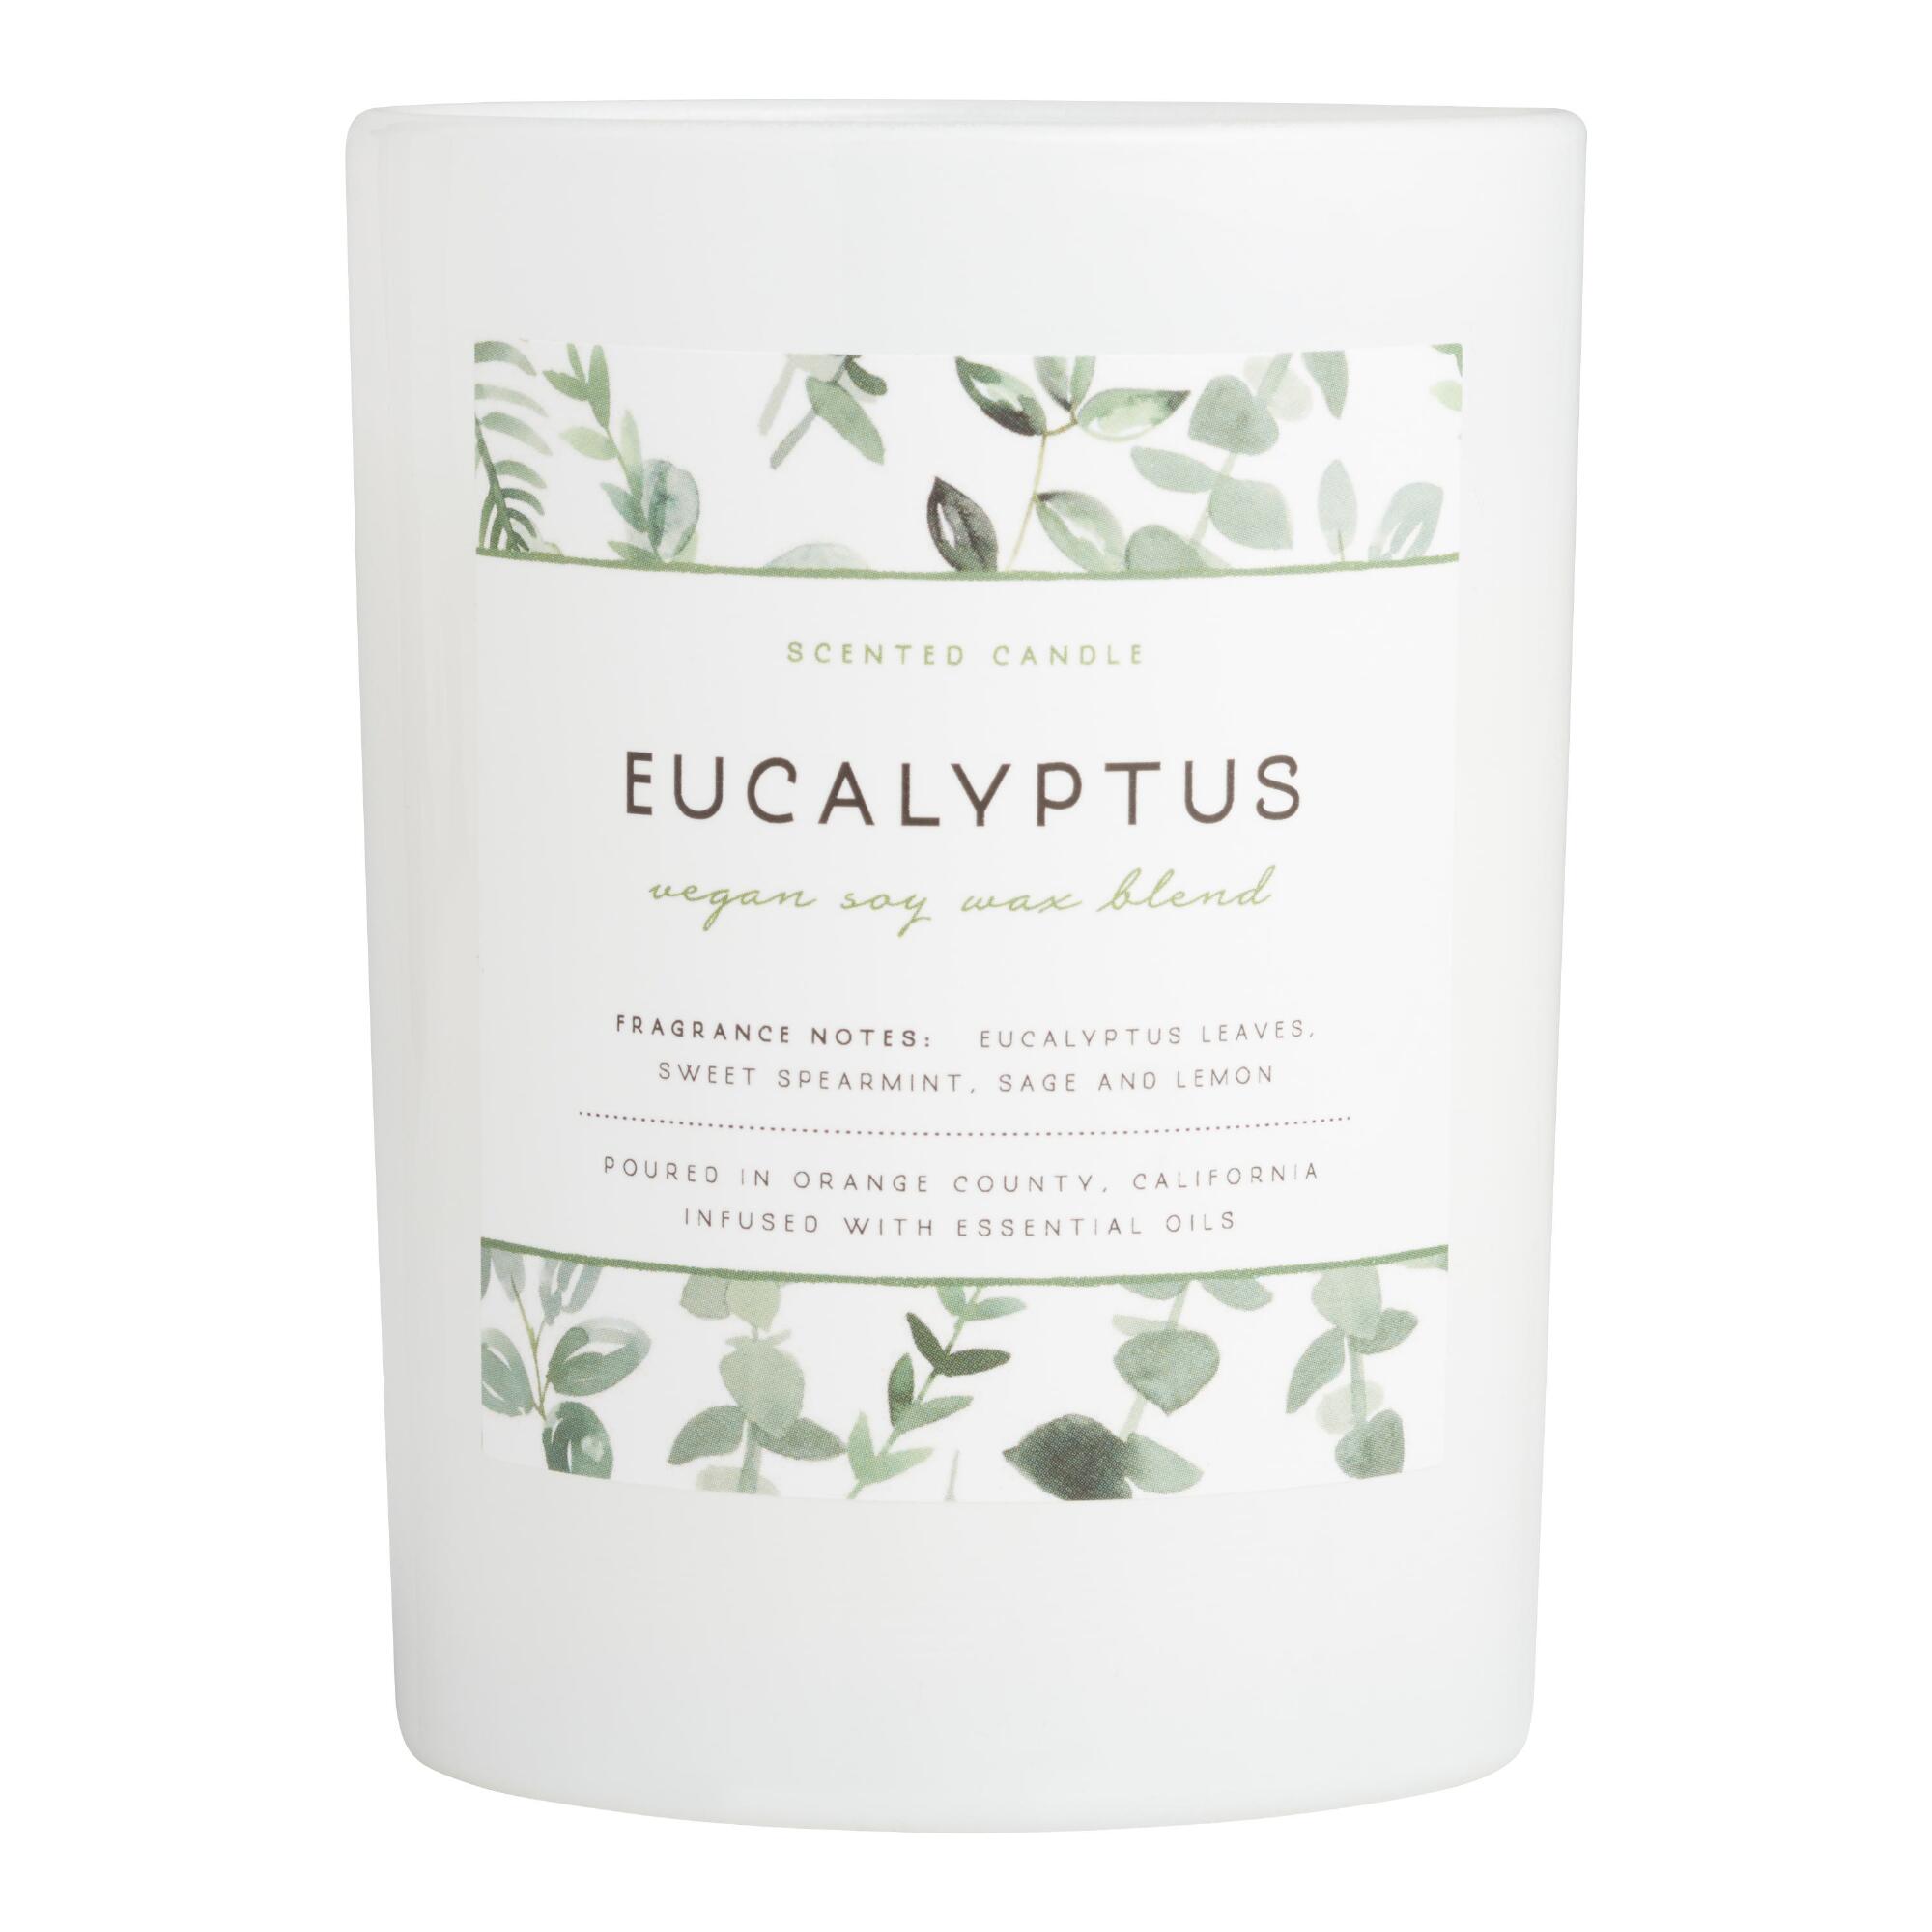 Eucalyptus Frosted Glass Filled Jar Candle: White by World Market